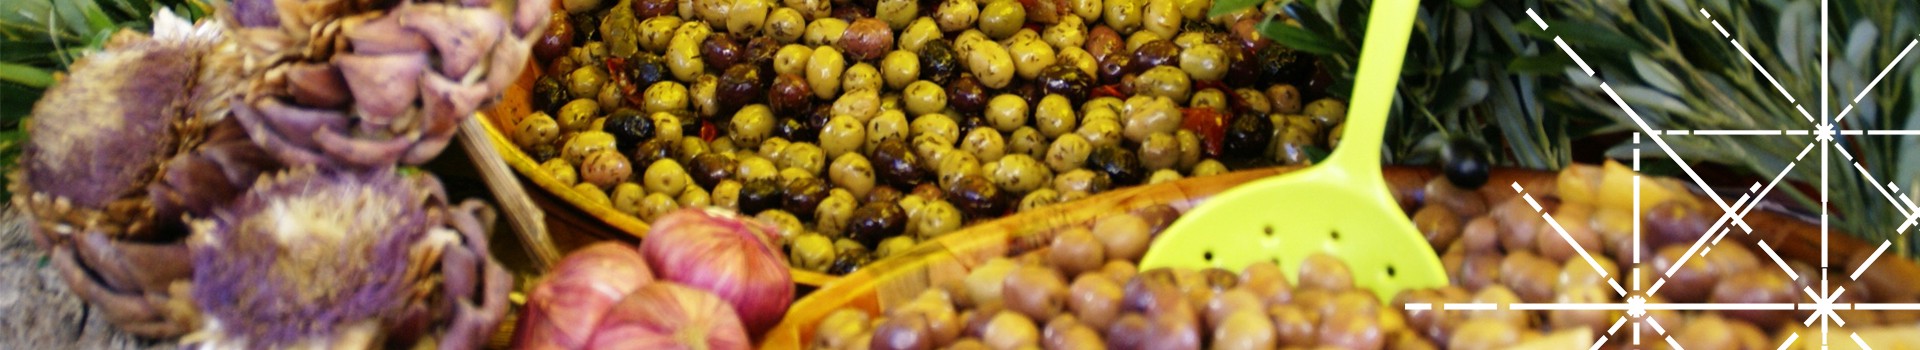 olives-ail-provence-occitane-tetiere-croisee-12